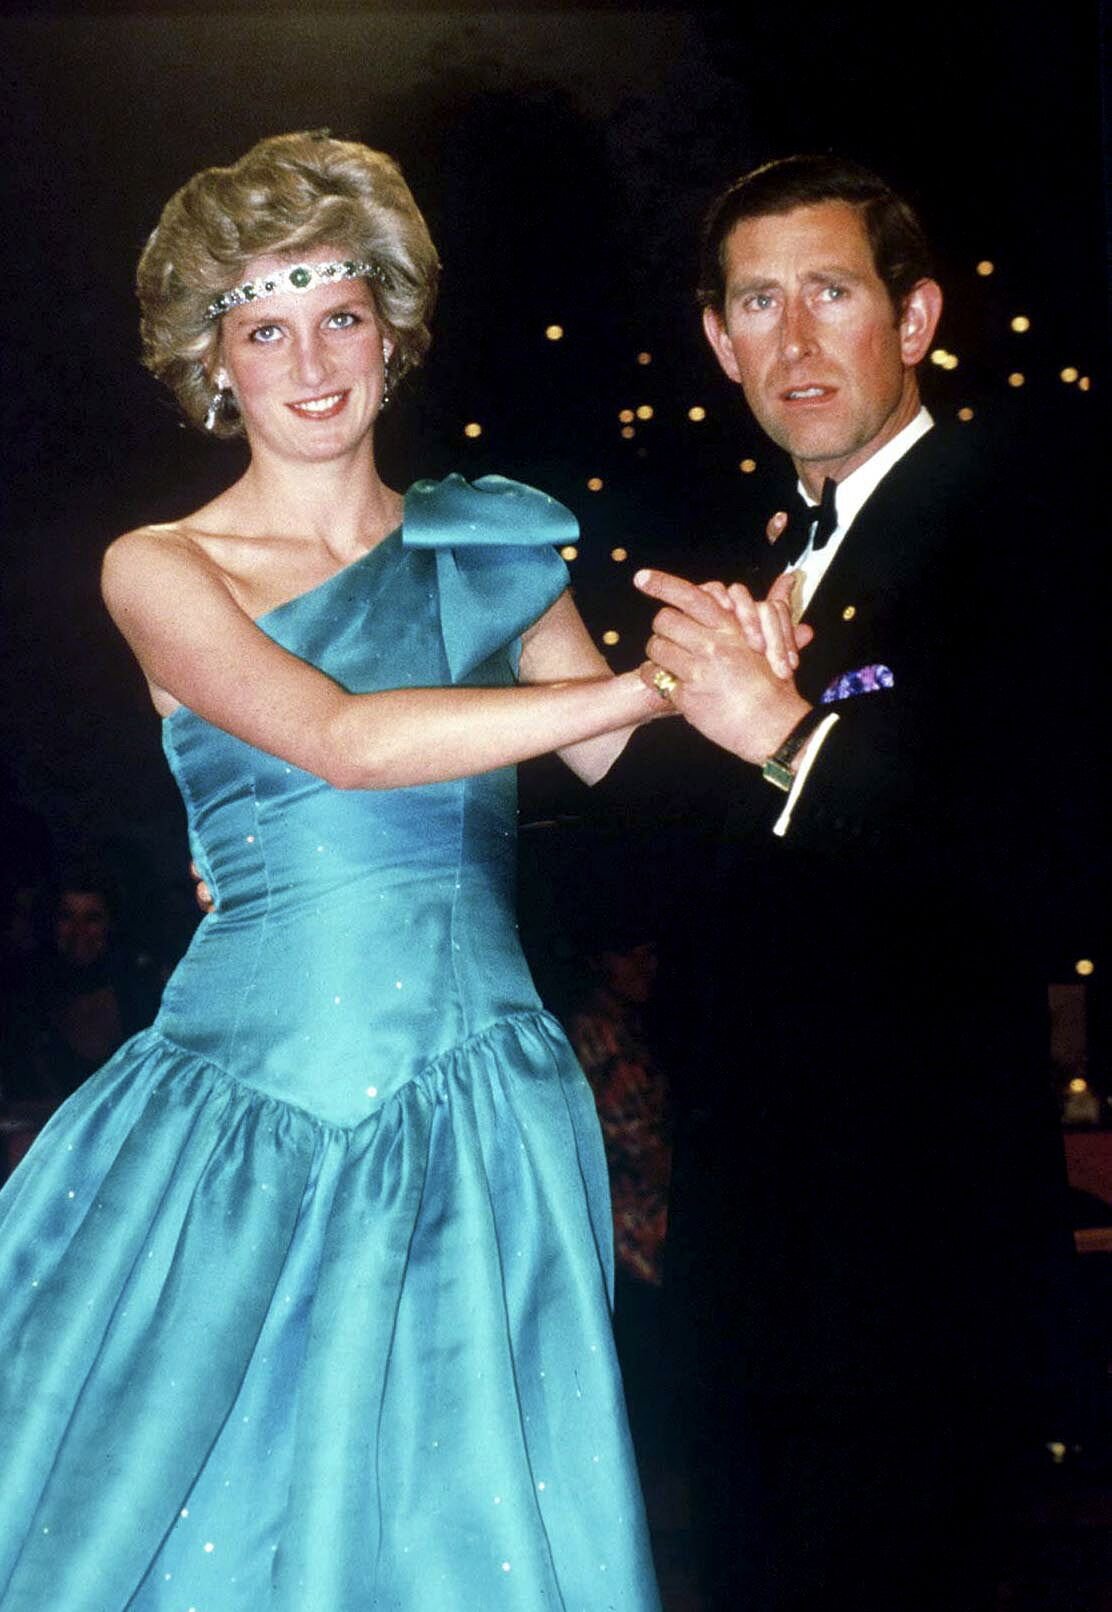 Prince Charles Dancing With His Wife, Princess Diana, in Melbourne. | Source: Getty Images